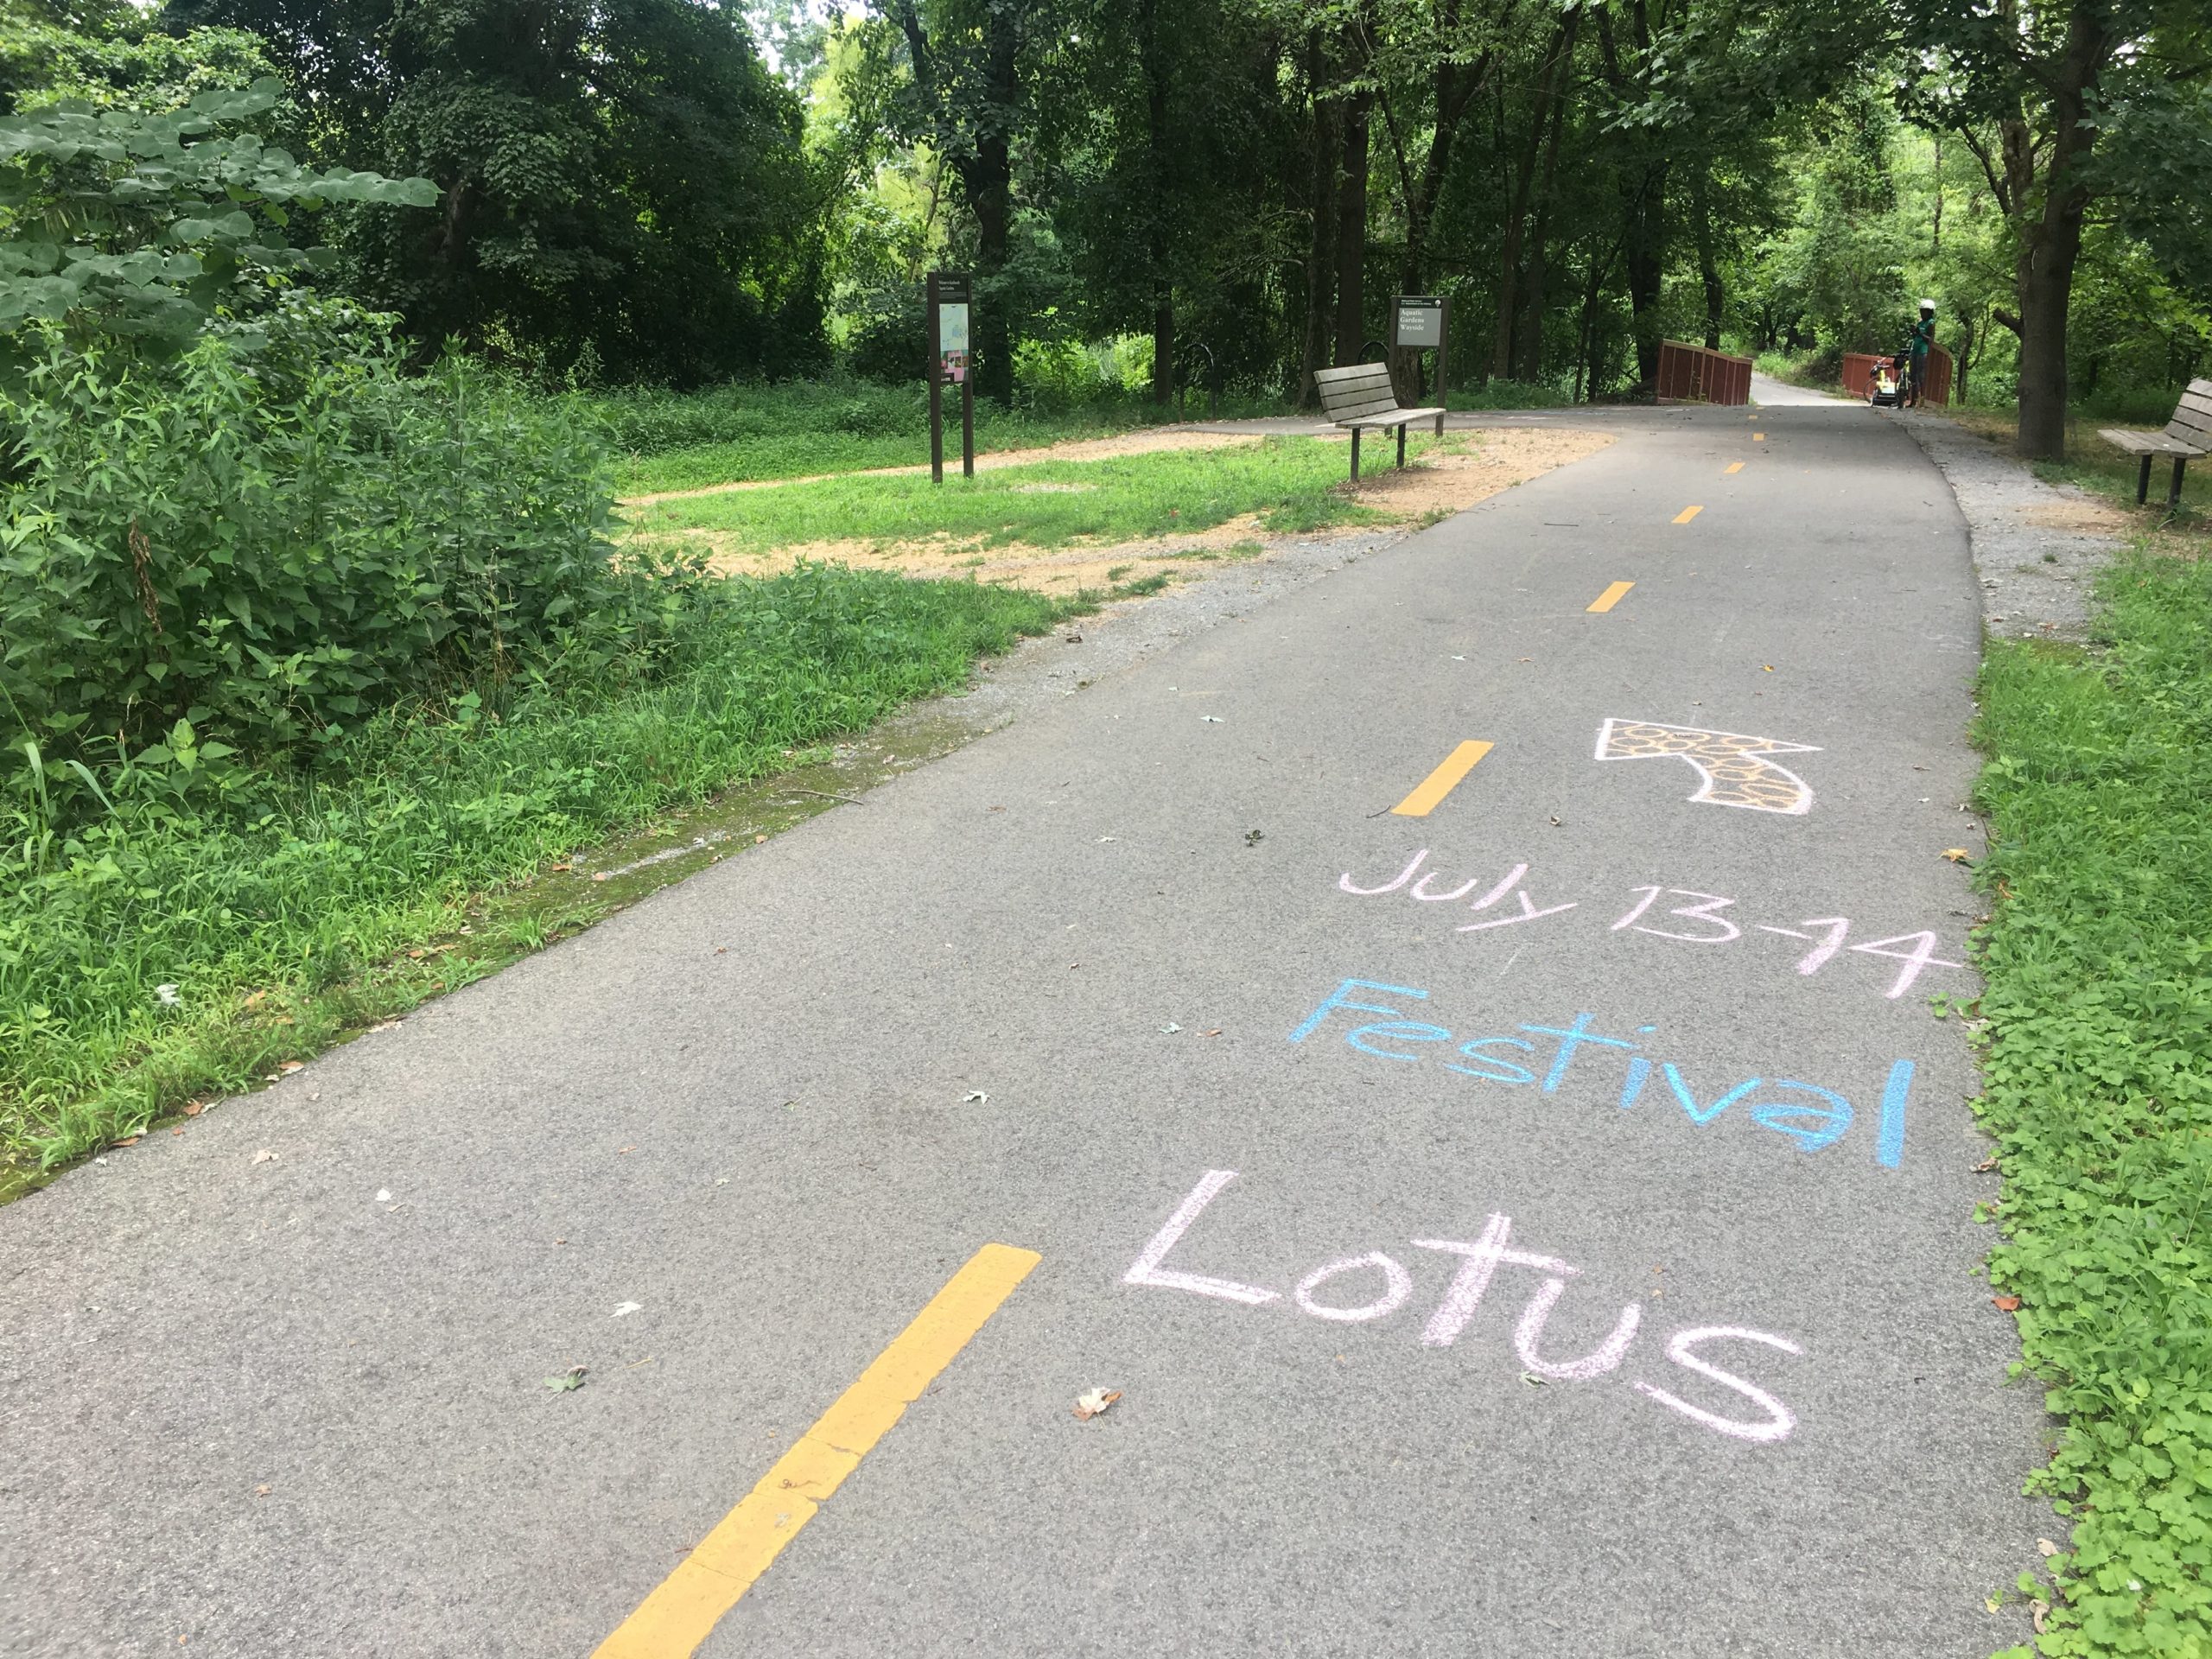 Trail and a gravel entrance. the chalk on the trail reads Lotus Festival with a left arrow to the gravel path. The trail is very green and shaded